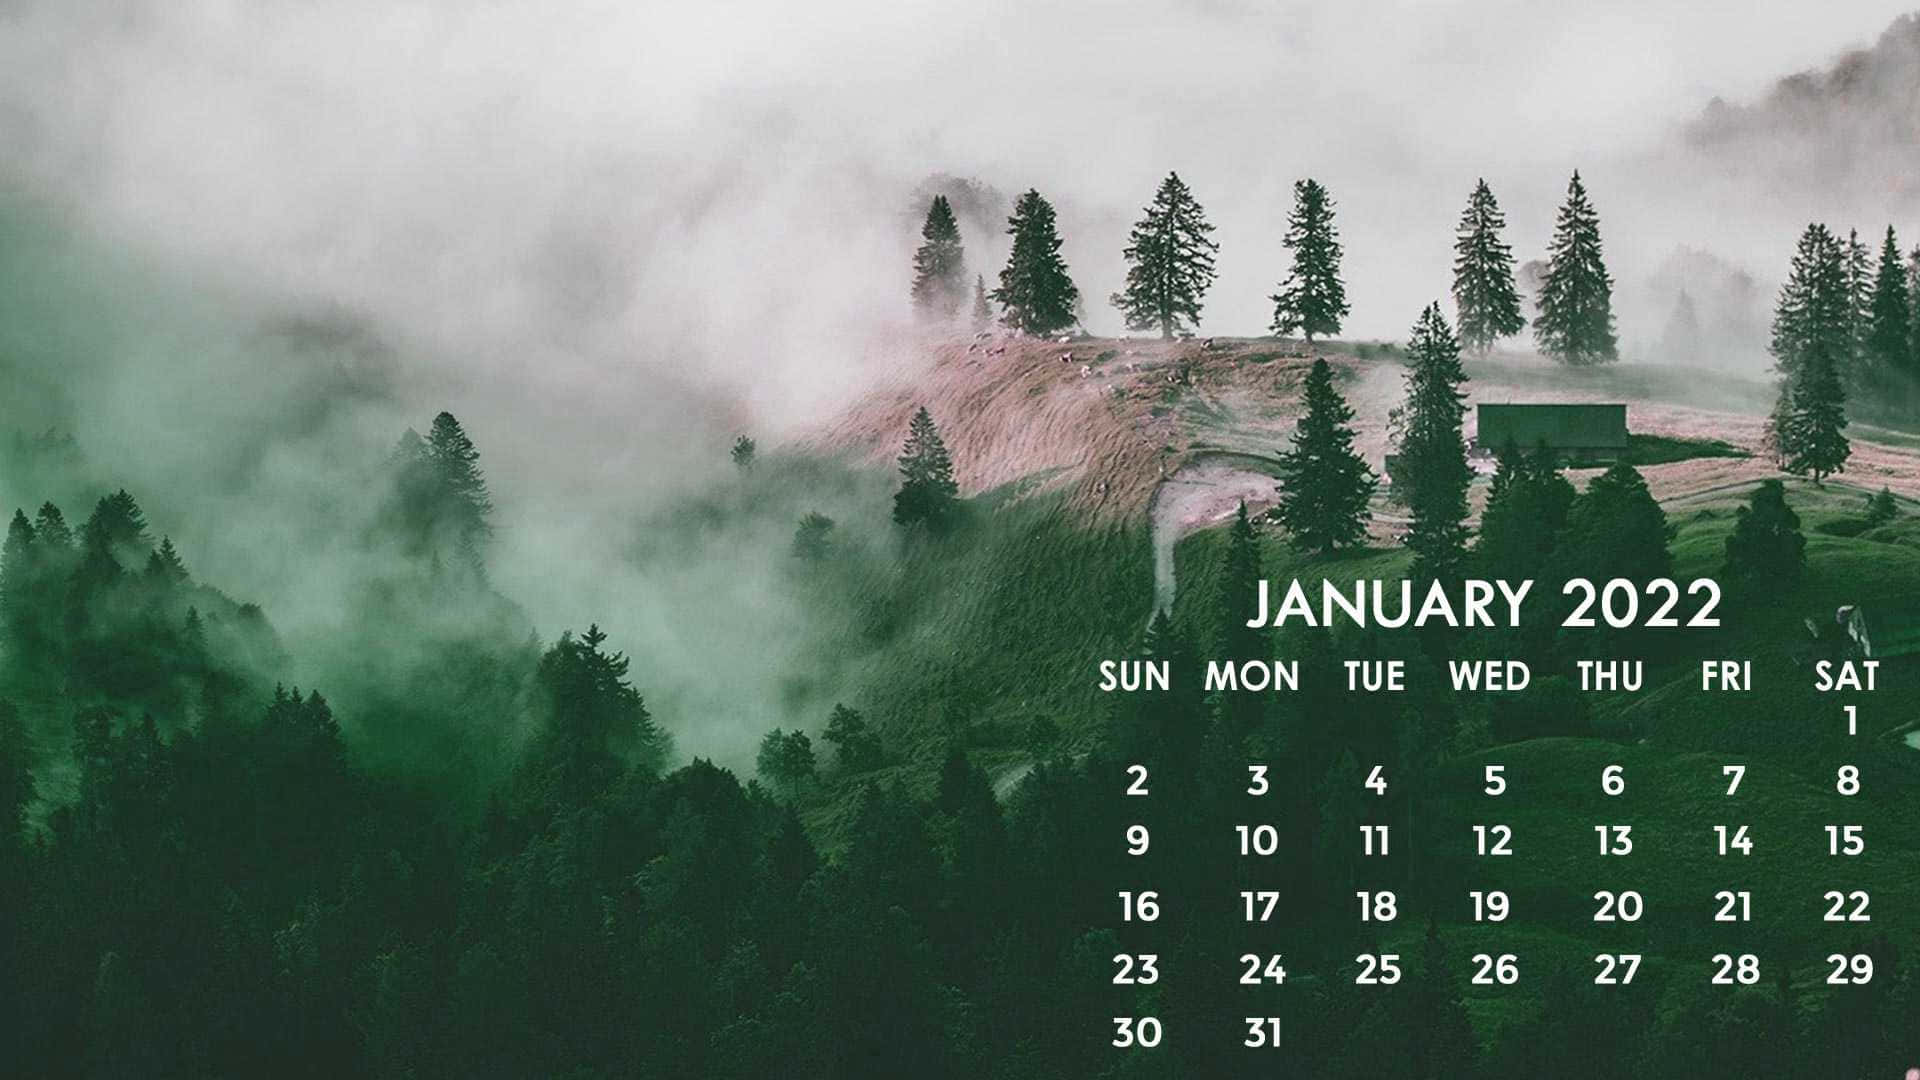 Download January 2022 Calendar 1920 X 1080 Background Wallpapers com